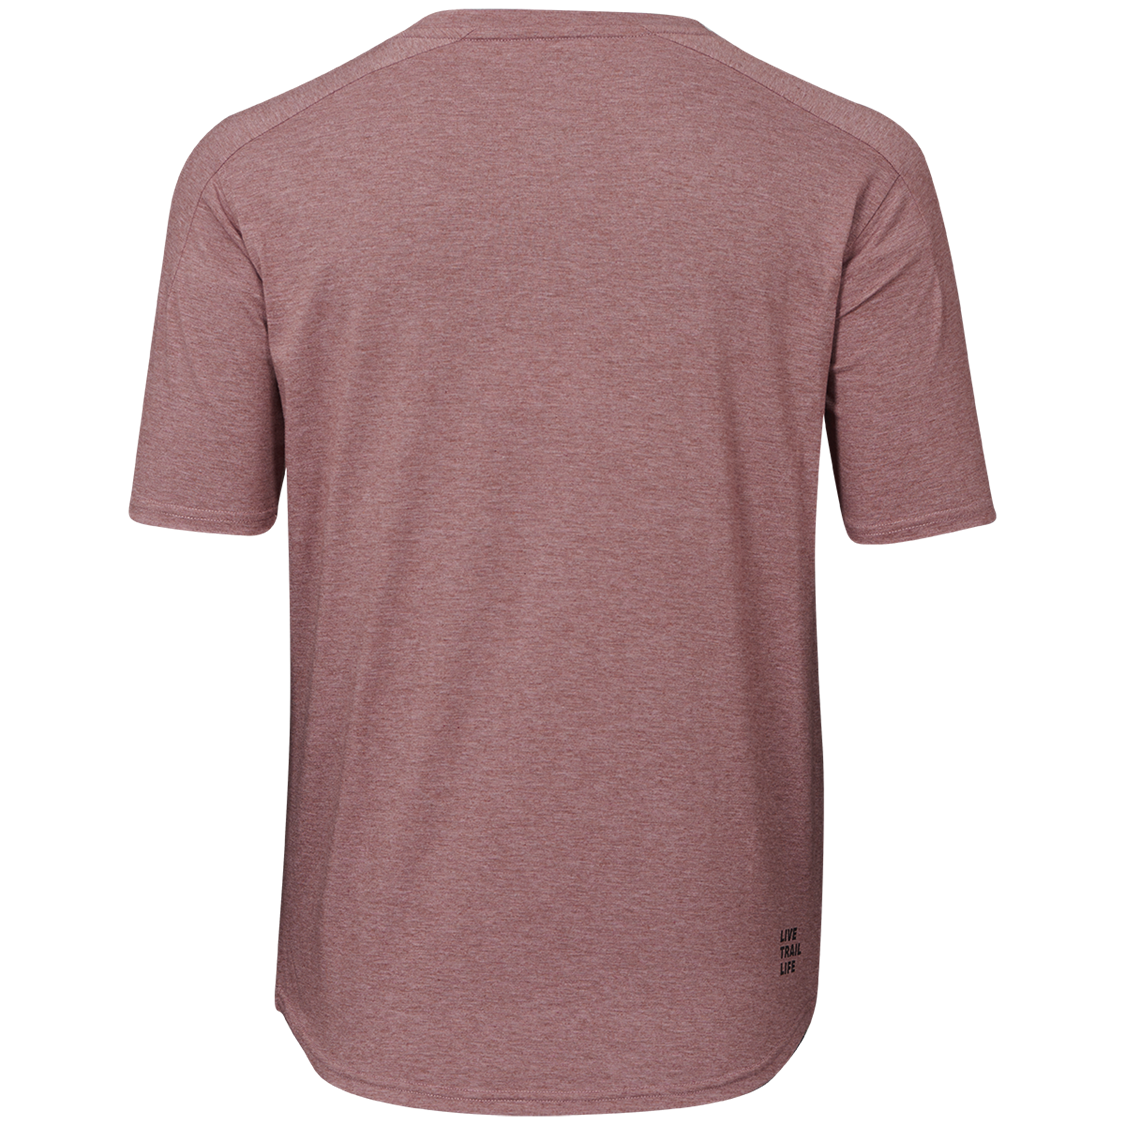 473-510-3351-155_04_Flow Fade Tech Tee Taupe_back